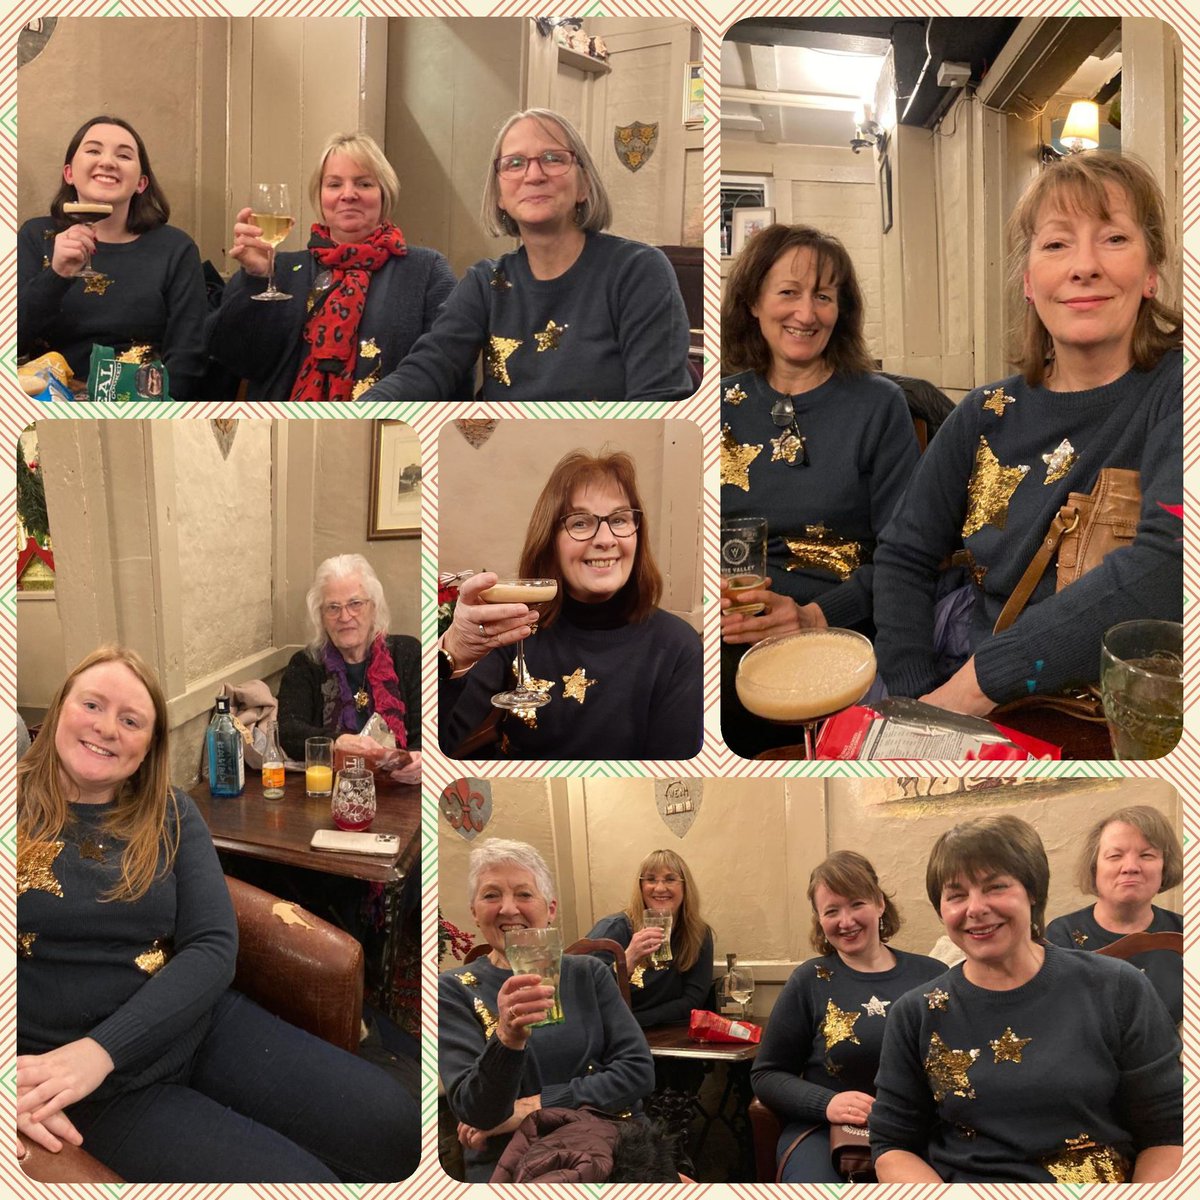 Our last event of 2022, a performance for #MuchWenlock WI, was followed by festive drinks! Thank you to everyone who has supported us this year, and especially for contributing to our fundraising for @ATSociety - we have raised over £800 for this wonderful charity this year 😊💙